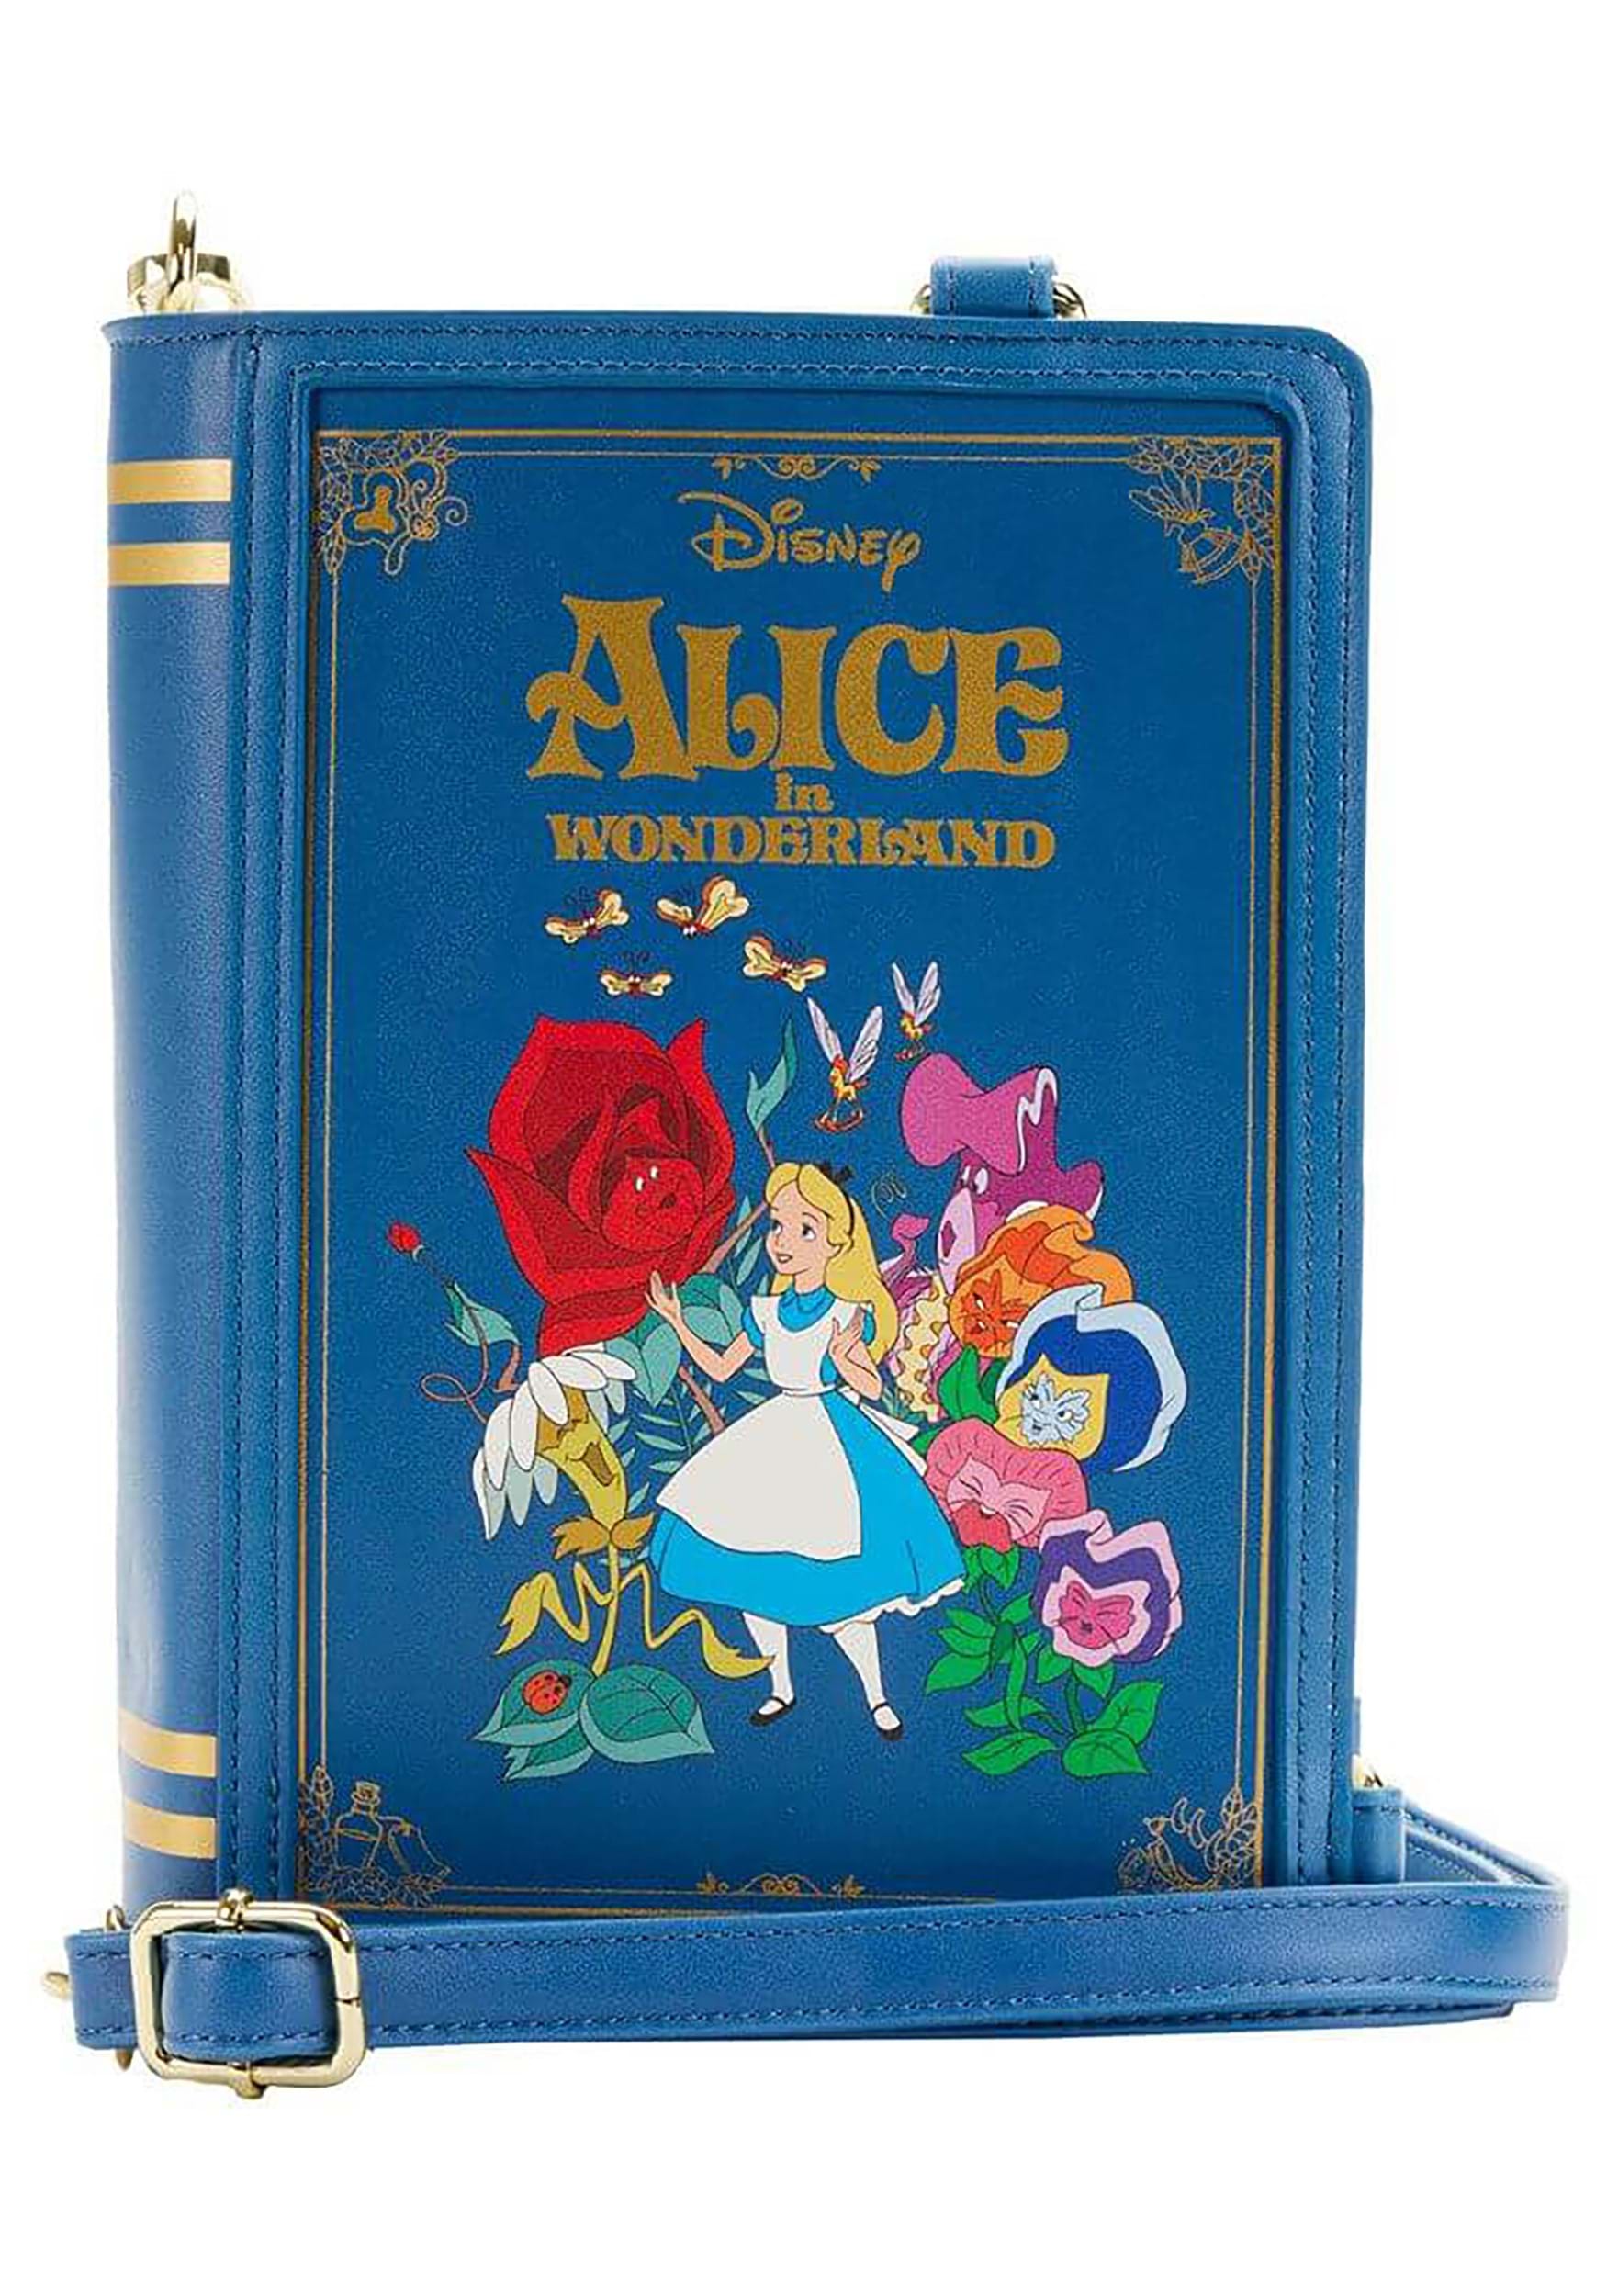 https://images.fun.com/products/80462/1-1/loungefly-alice-in-wonderland-book-convertible-crossbody-1.jpg